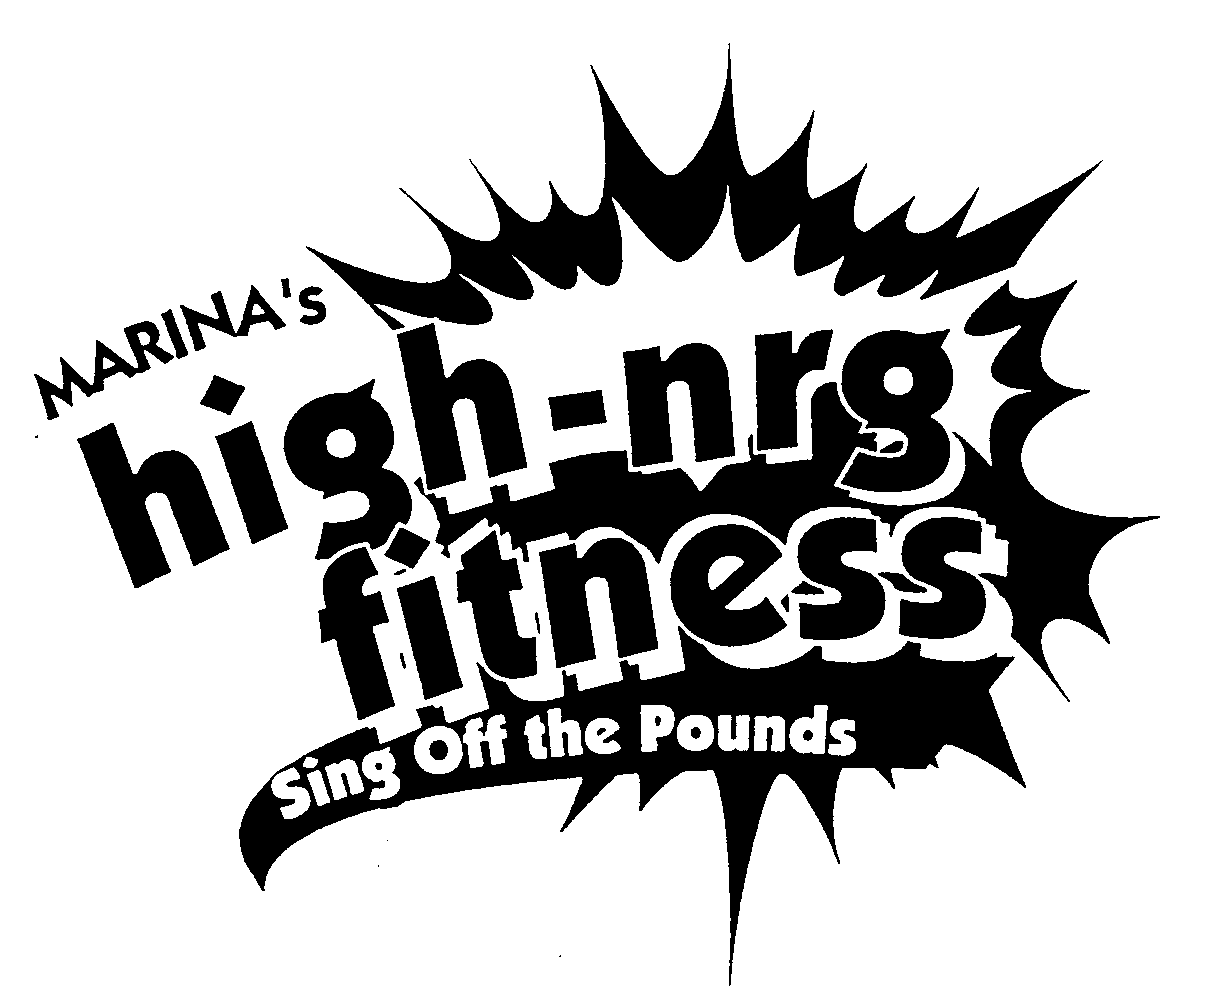  MARINA'S HIGH-NRG FITNESS SING OFF THE POUNDS